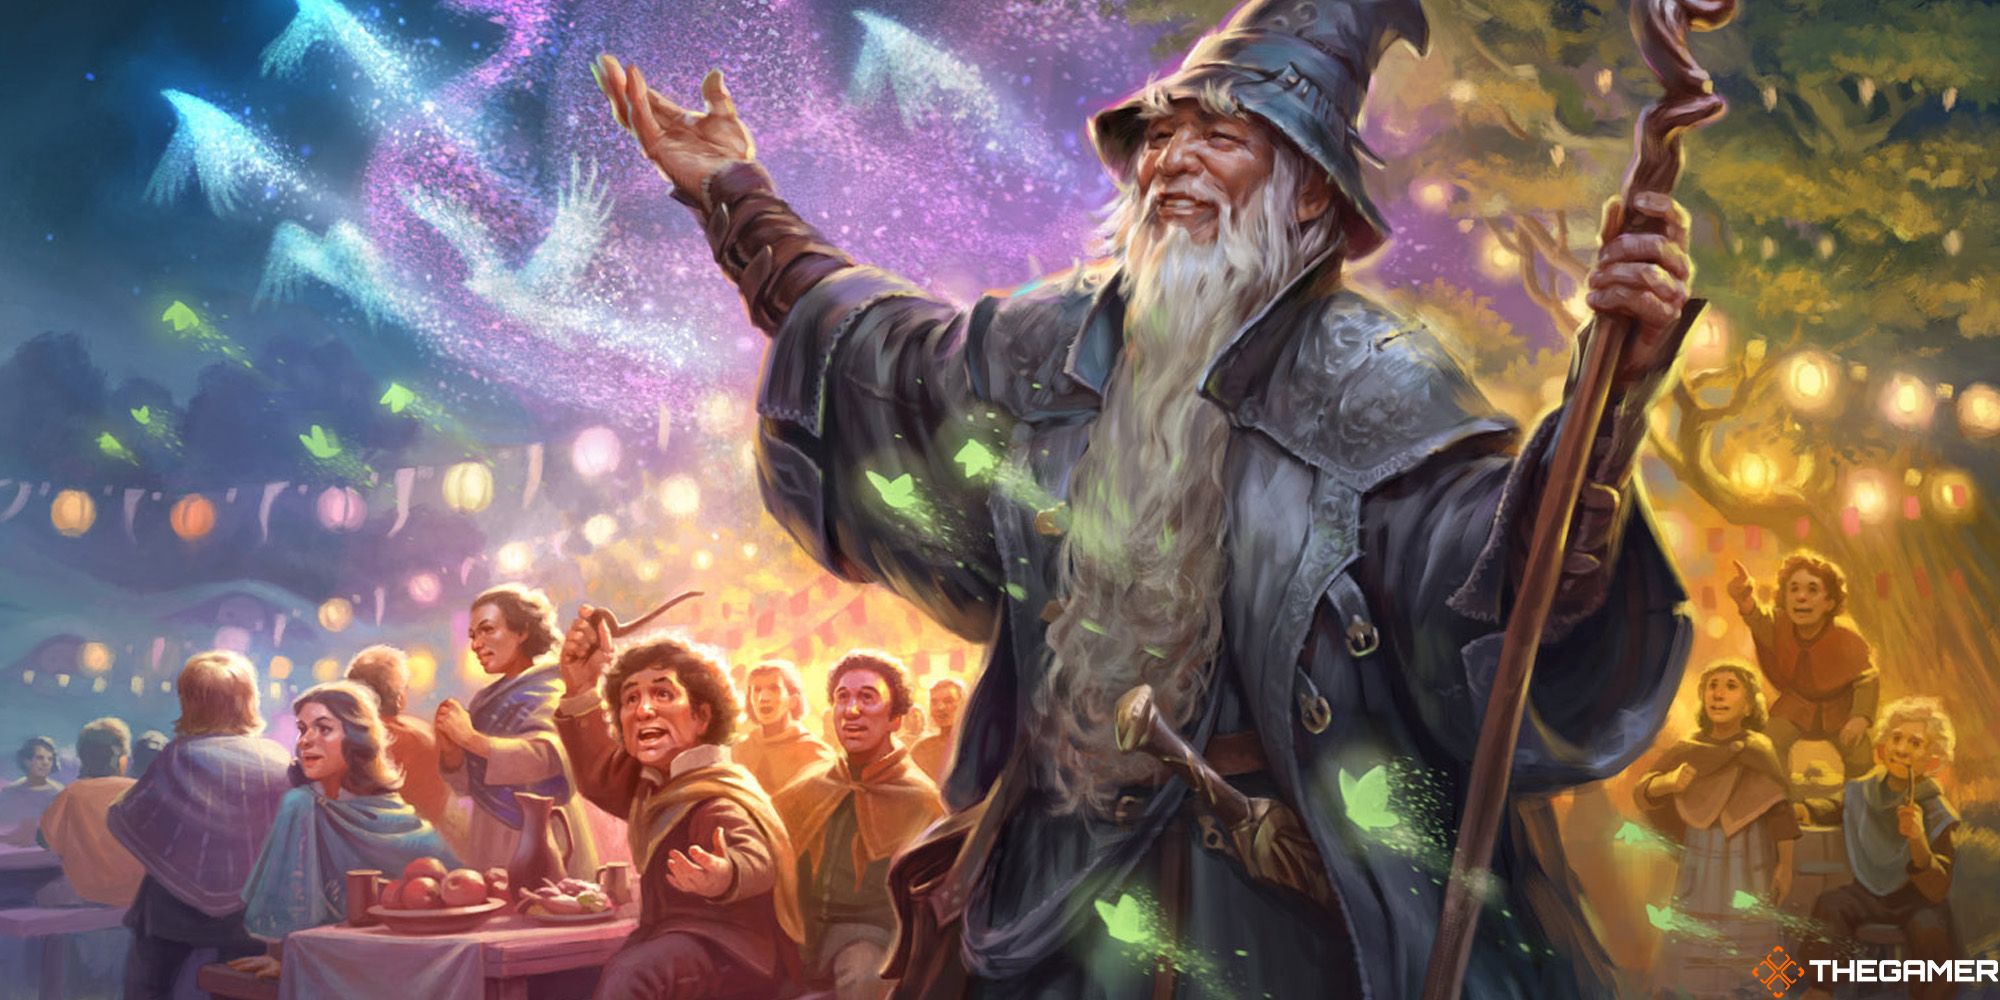 Gandalf and hobbits in key art for Tales of Middle-earth